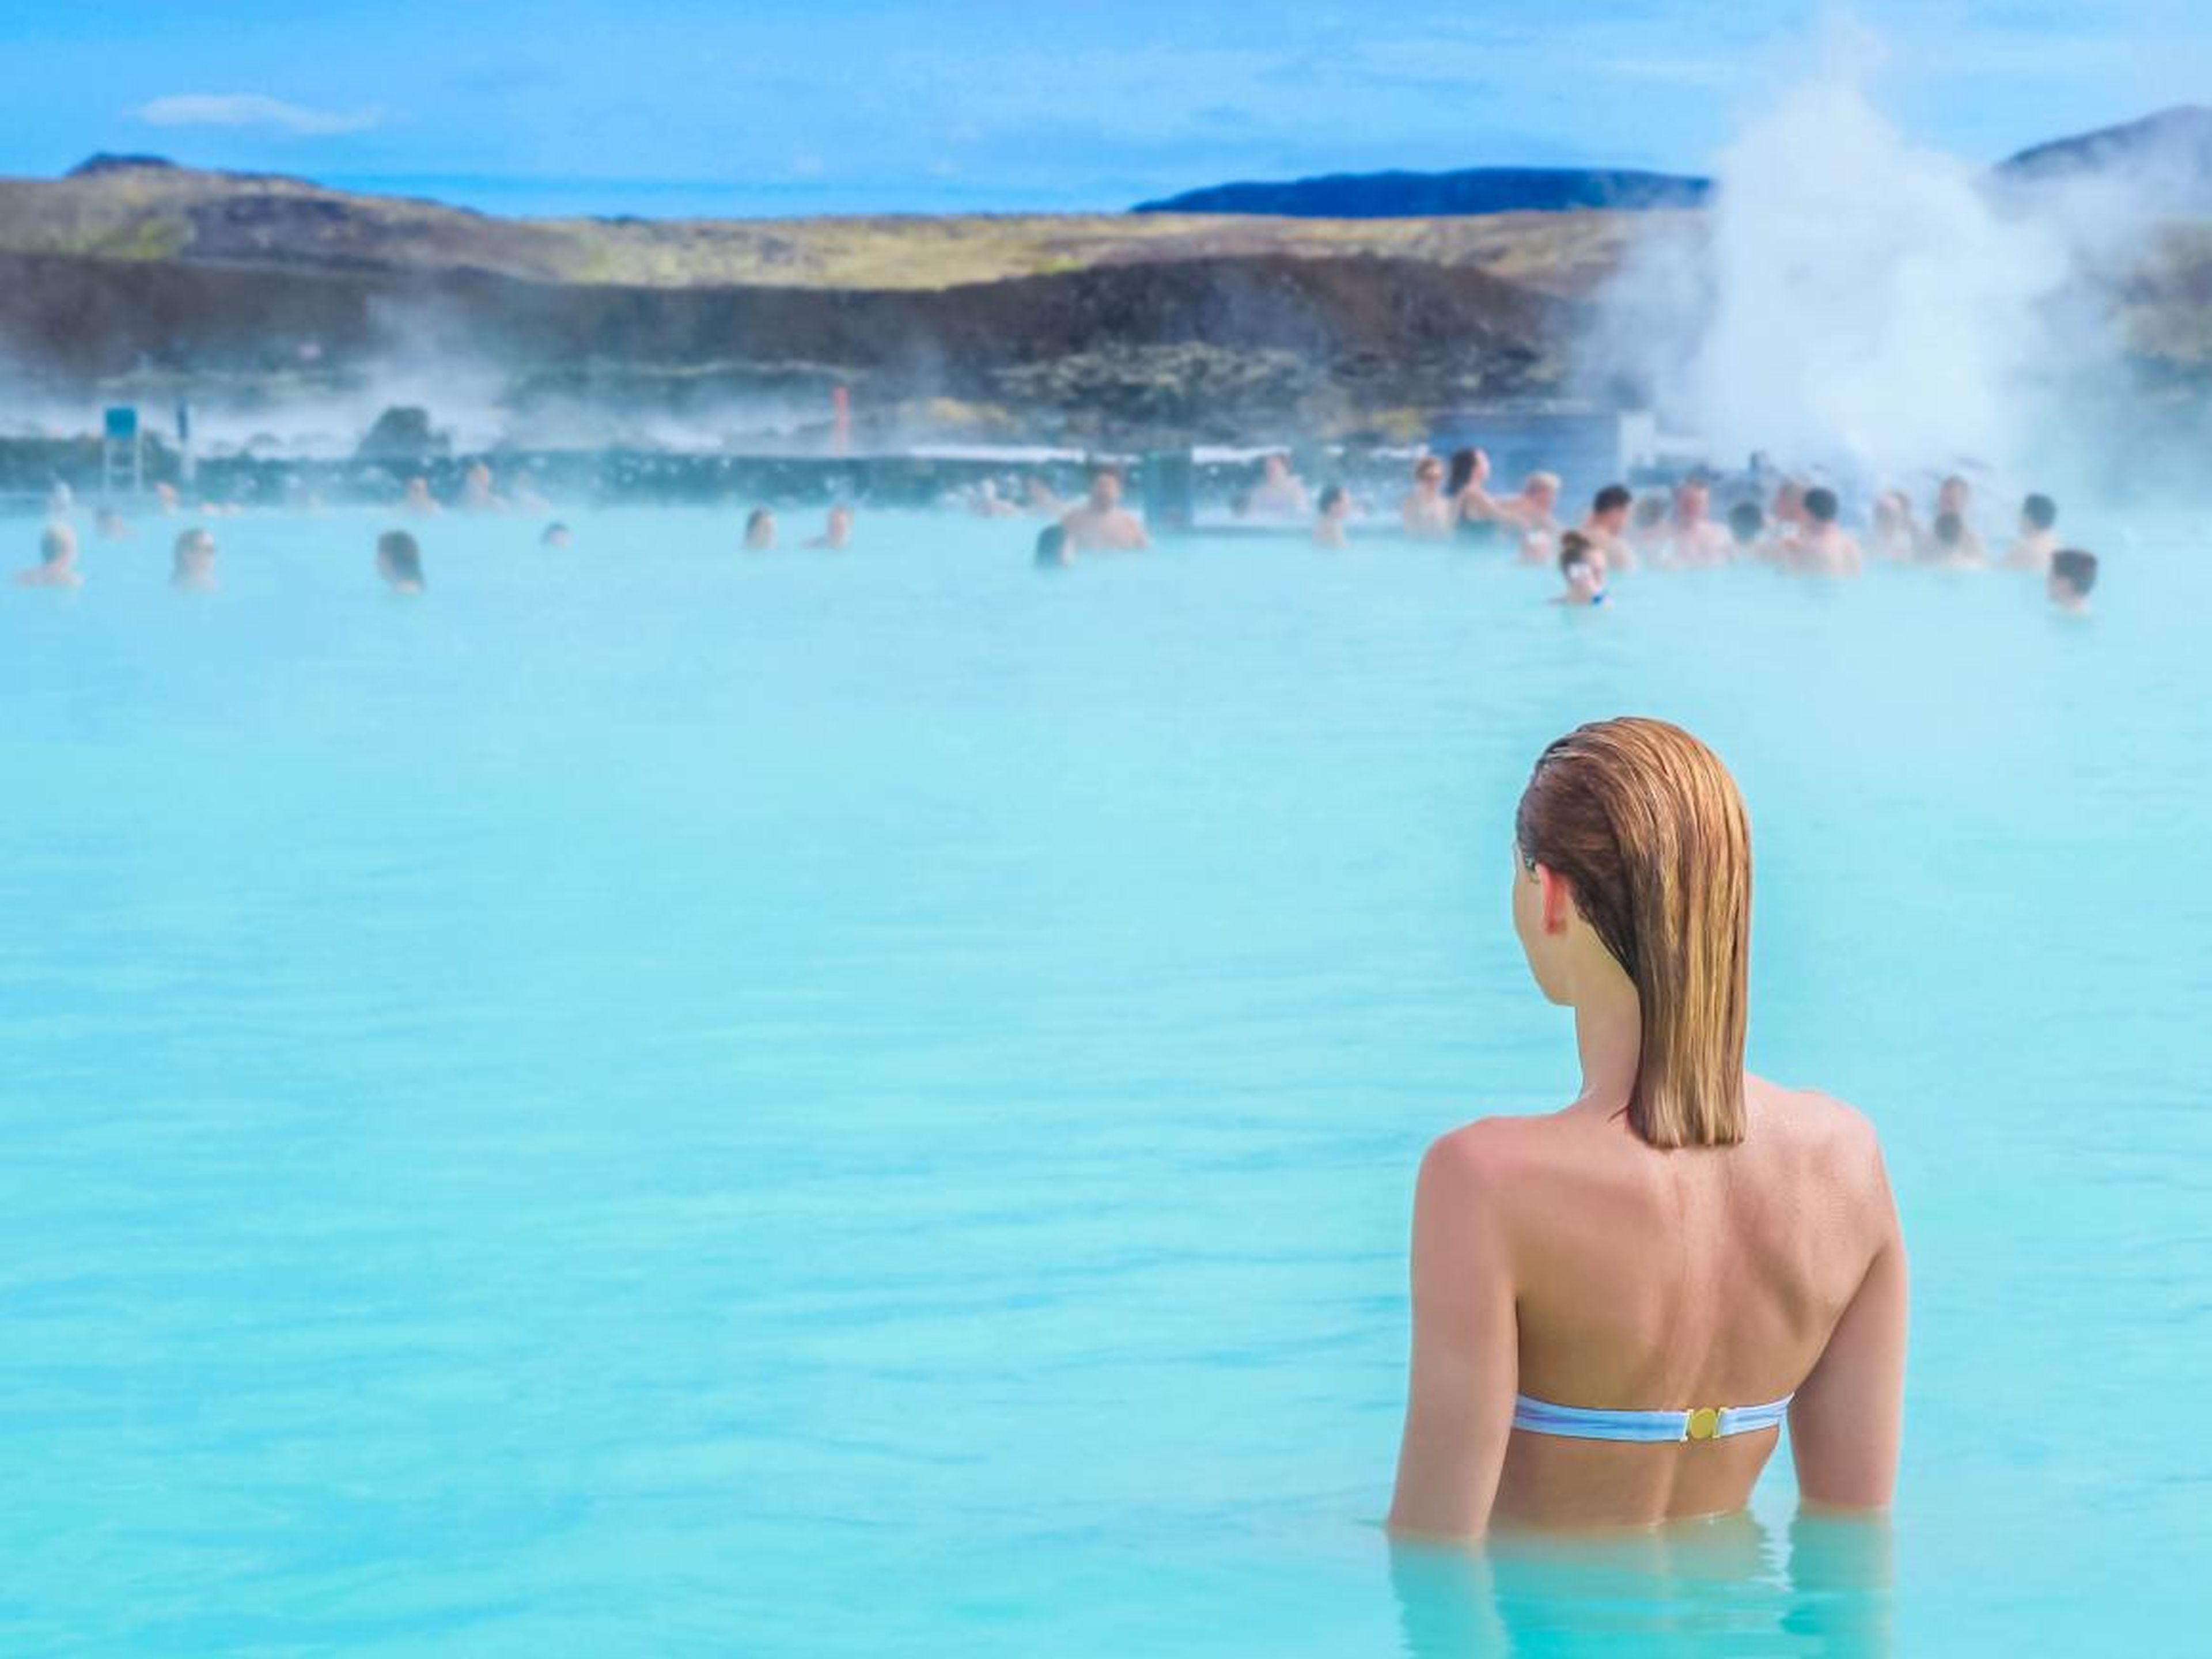 The Blue Lagoon saw nearly 1.2 million visitors in 2017.